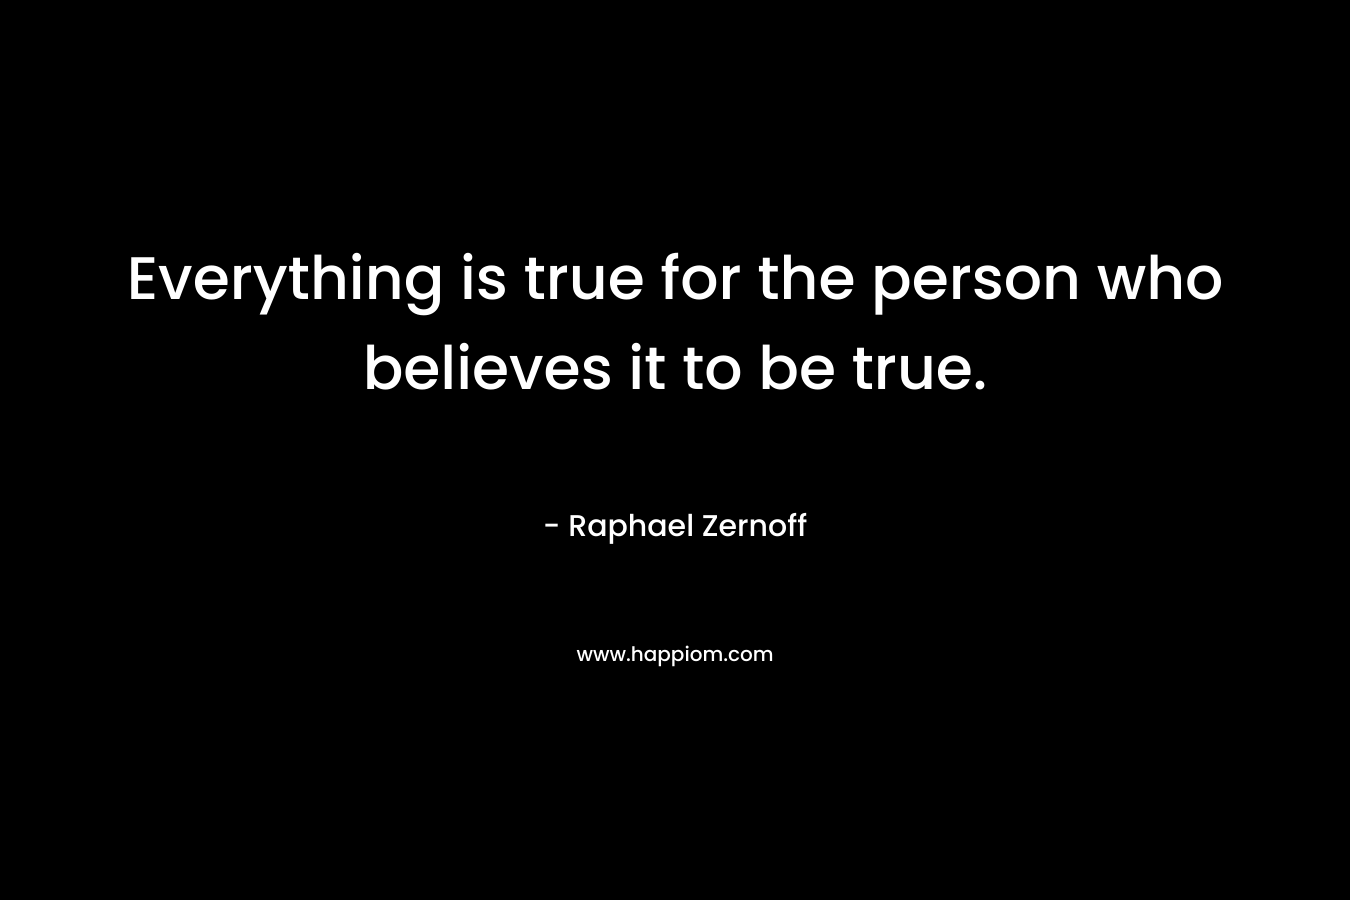 Everything is true for the person who believes it to be true. – Raphael Zernoff